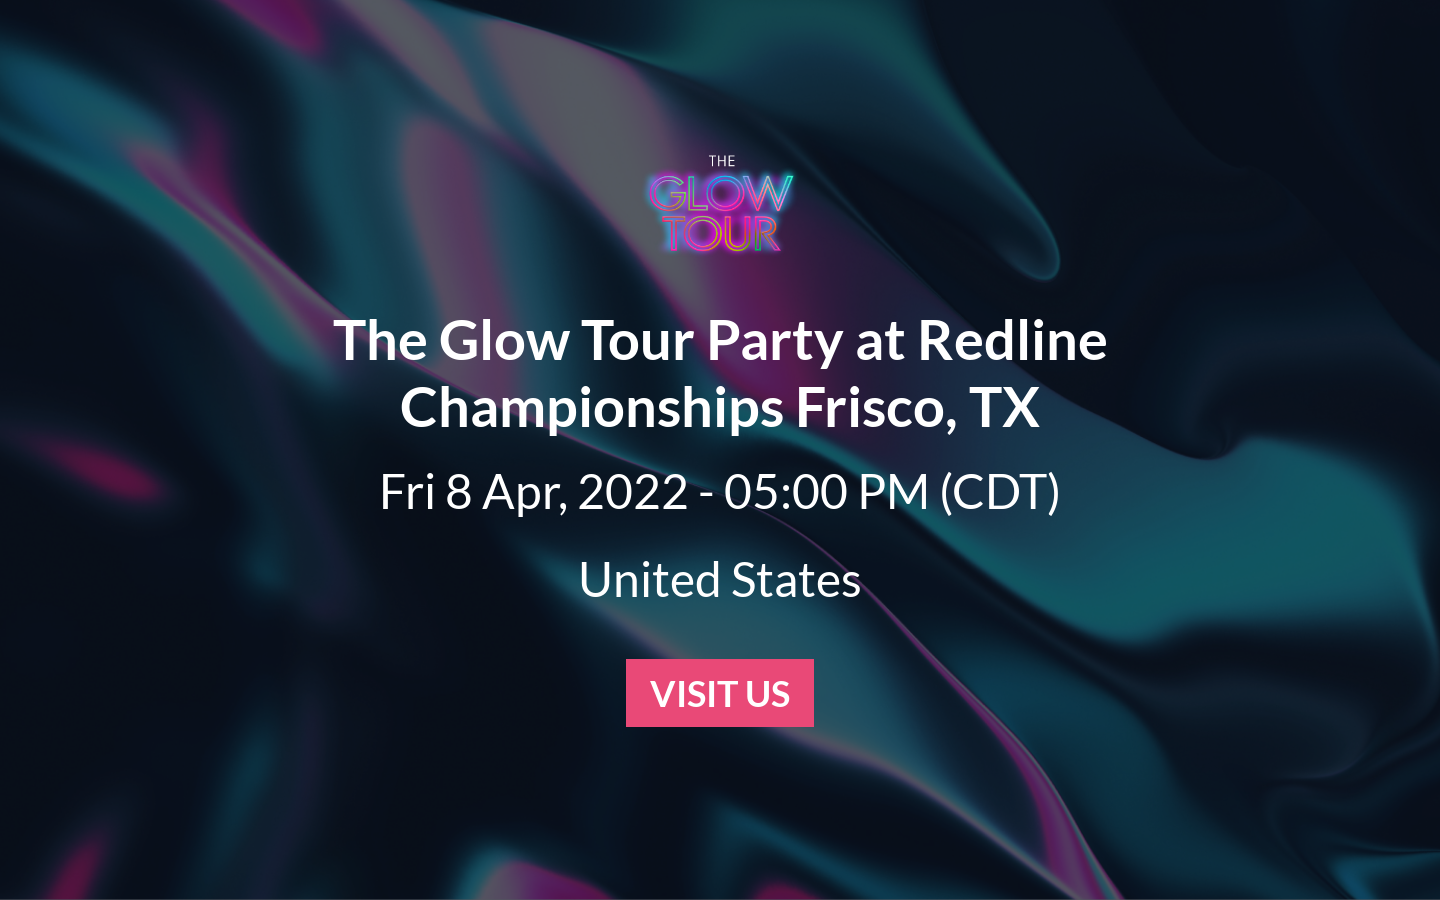 The Glow Tour Party at Redline Championships Frisco, TX